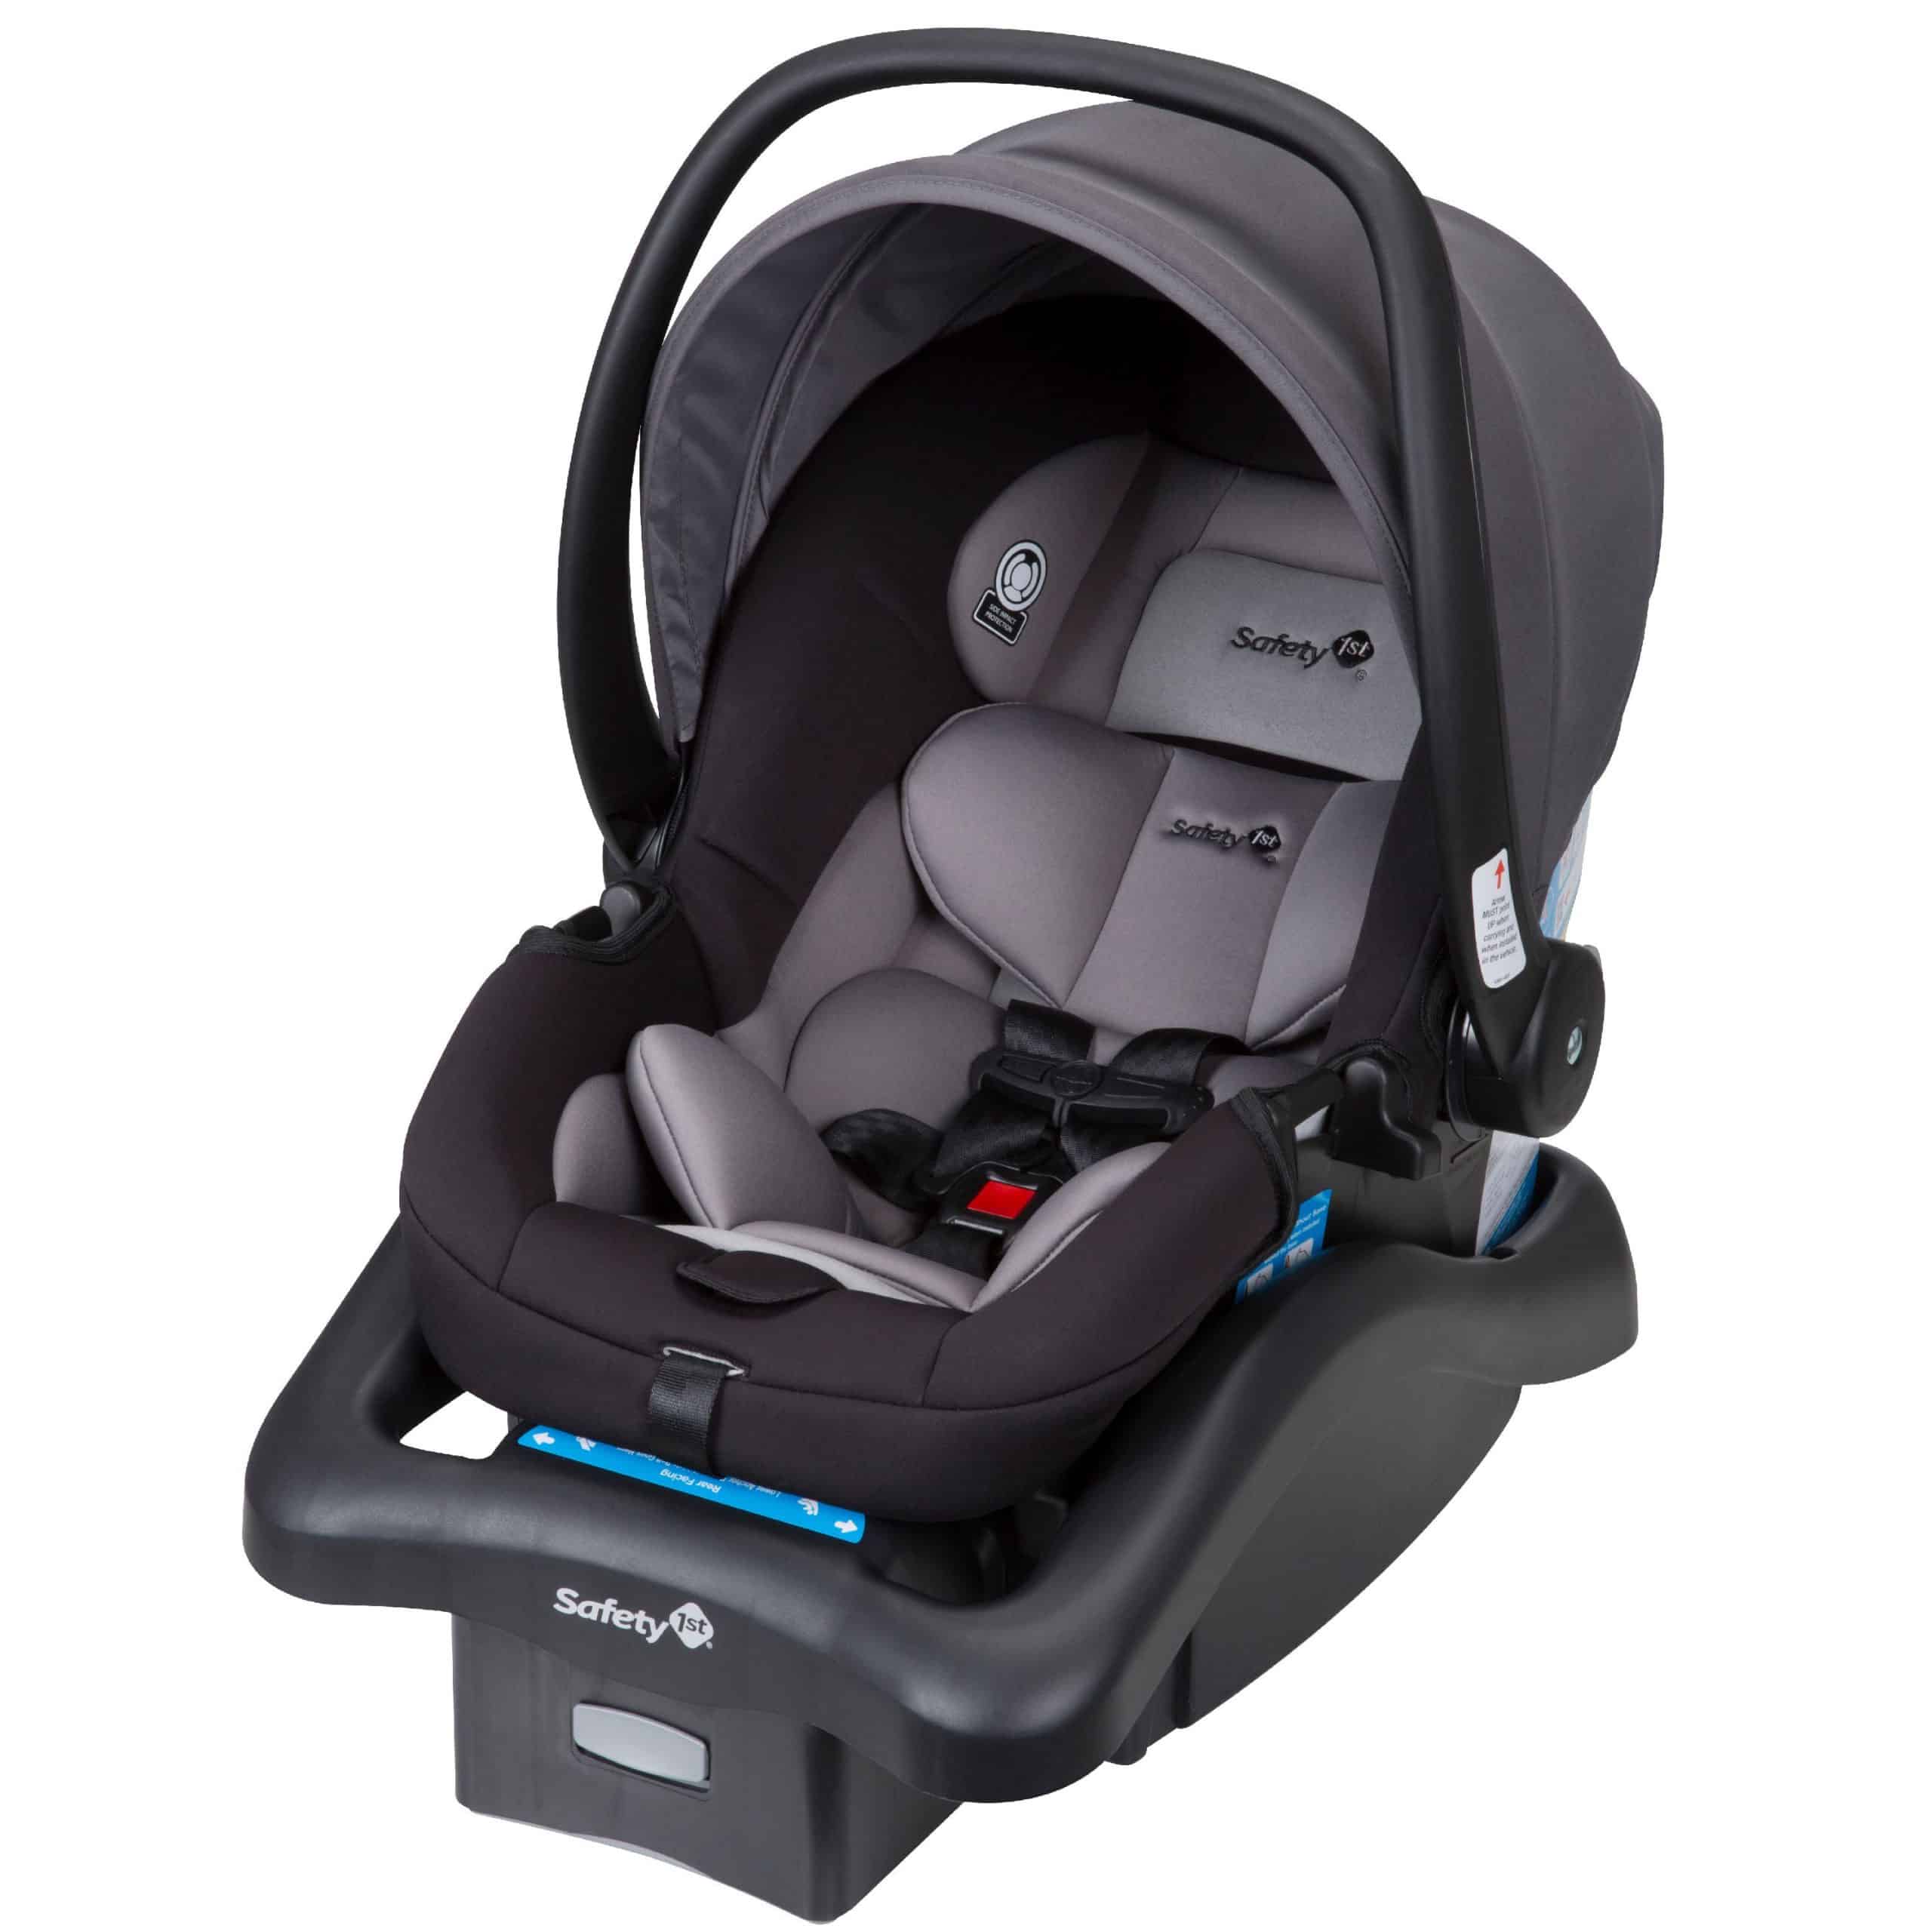 Safety 1st onBoard 35 LT Infant Car Seat, Monument